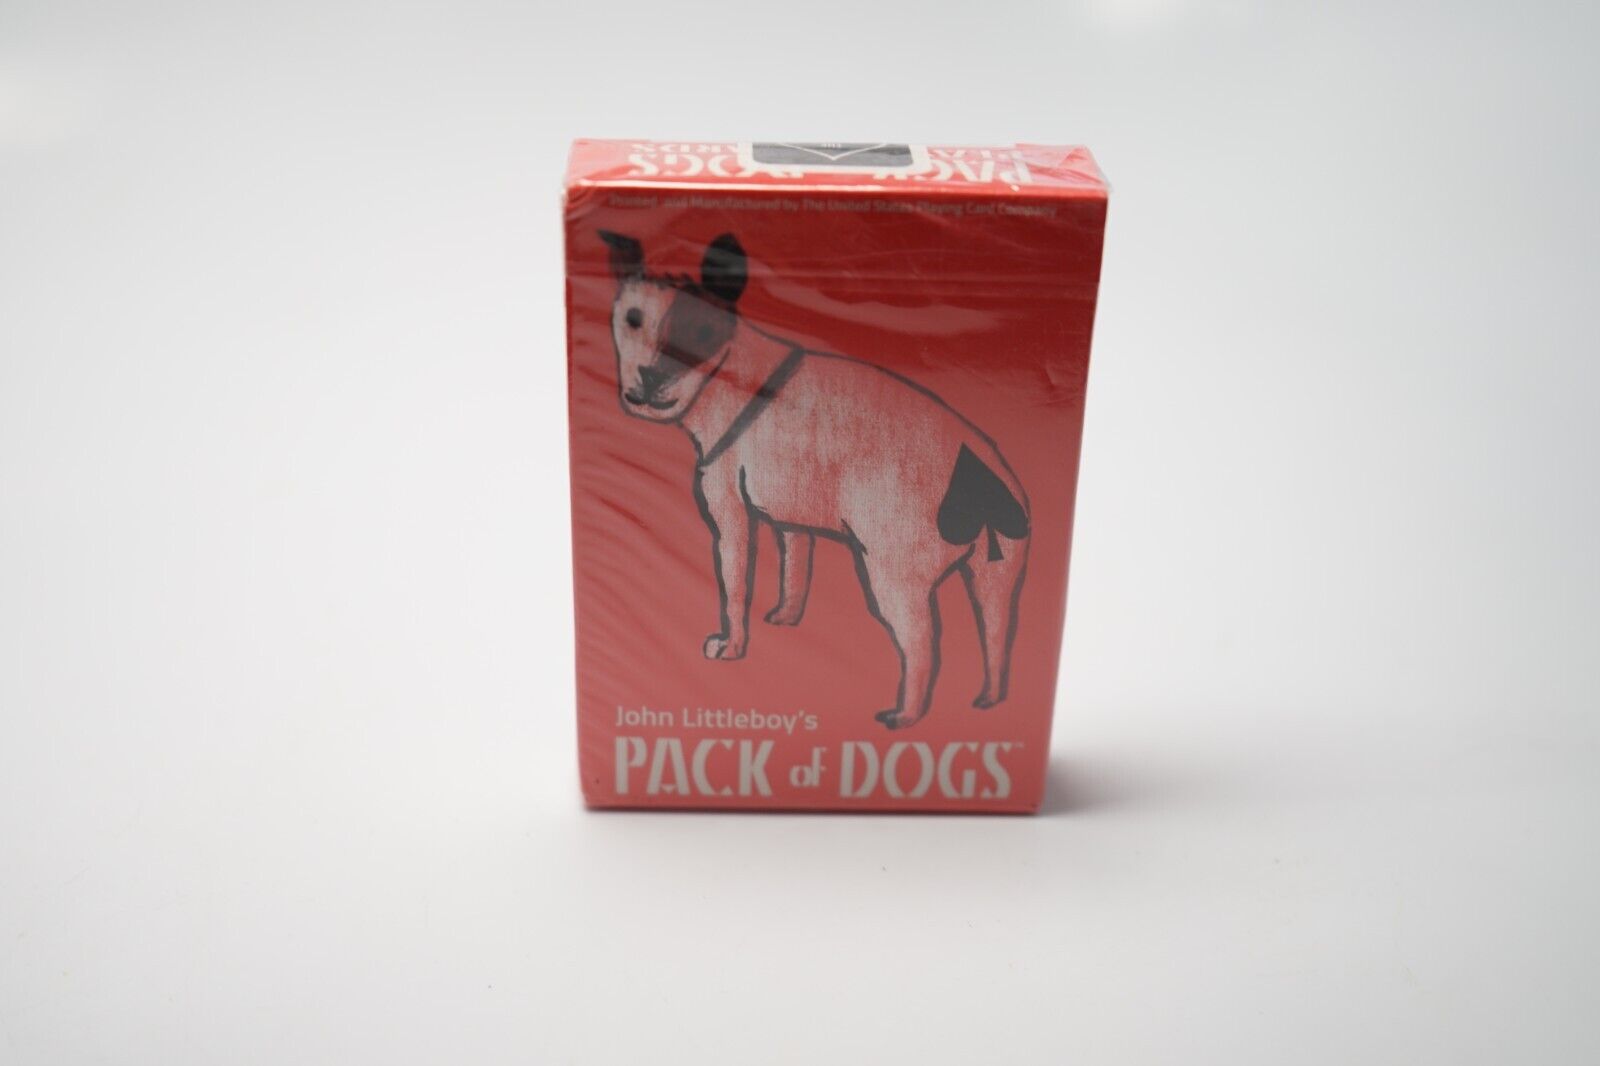 NEW Sealed John Littleboy’s Pack of Dogs playing cards RARE 2014